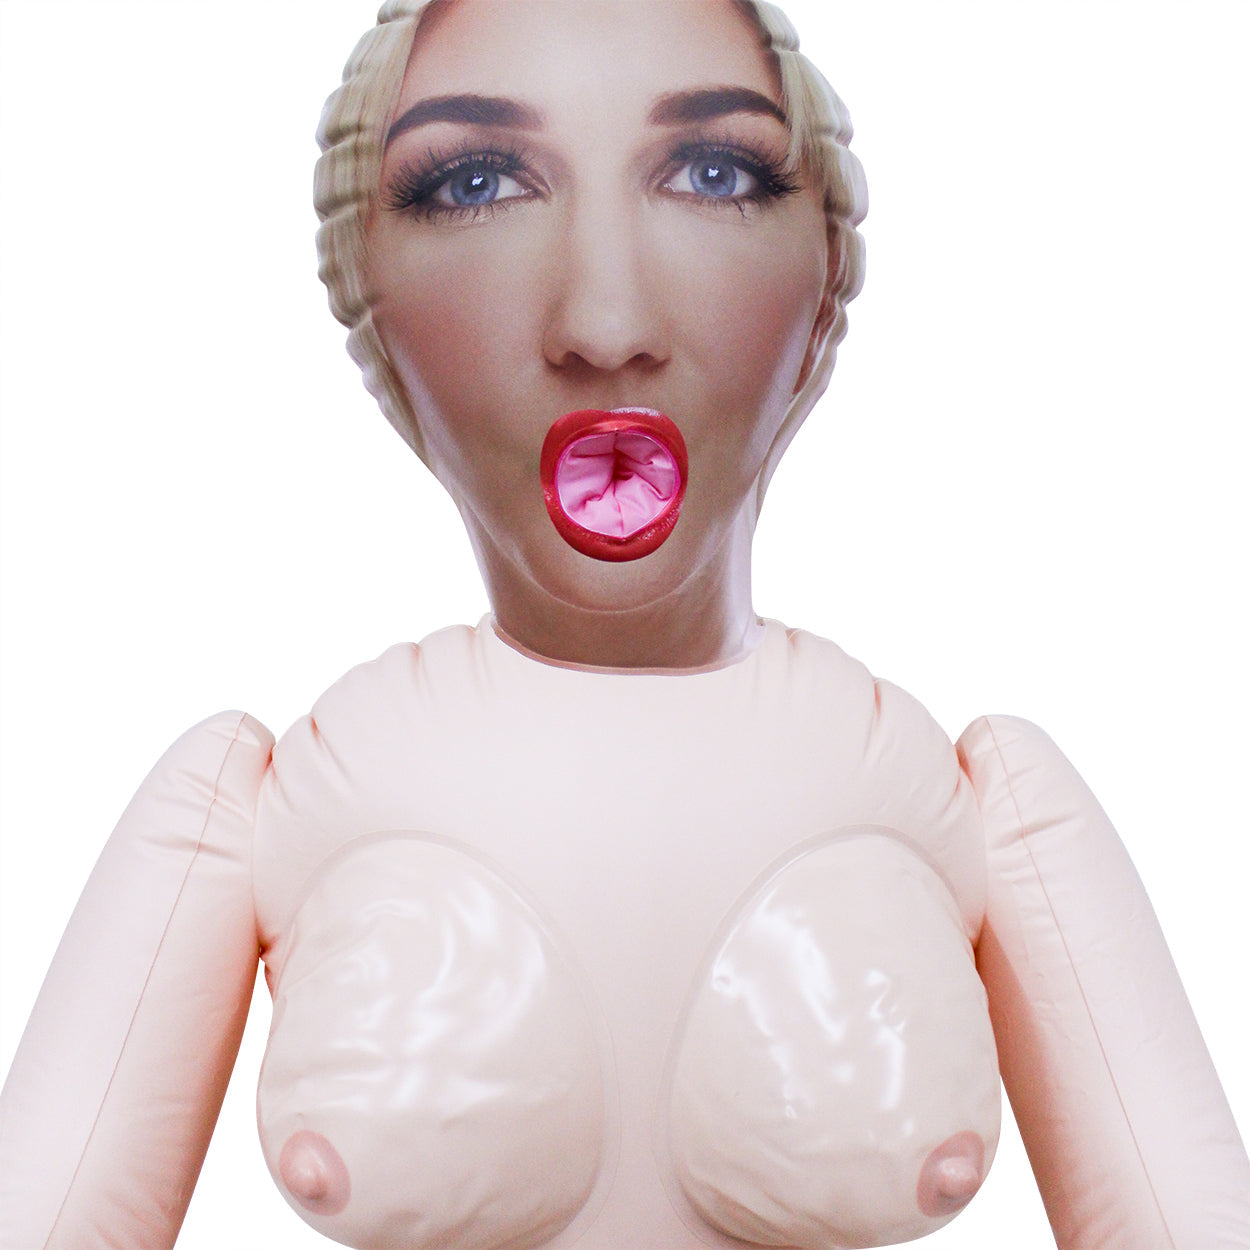 The Sure Thing Bachelor Party Blow Up Doll